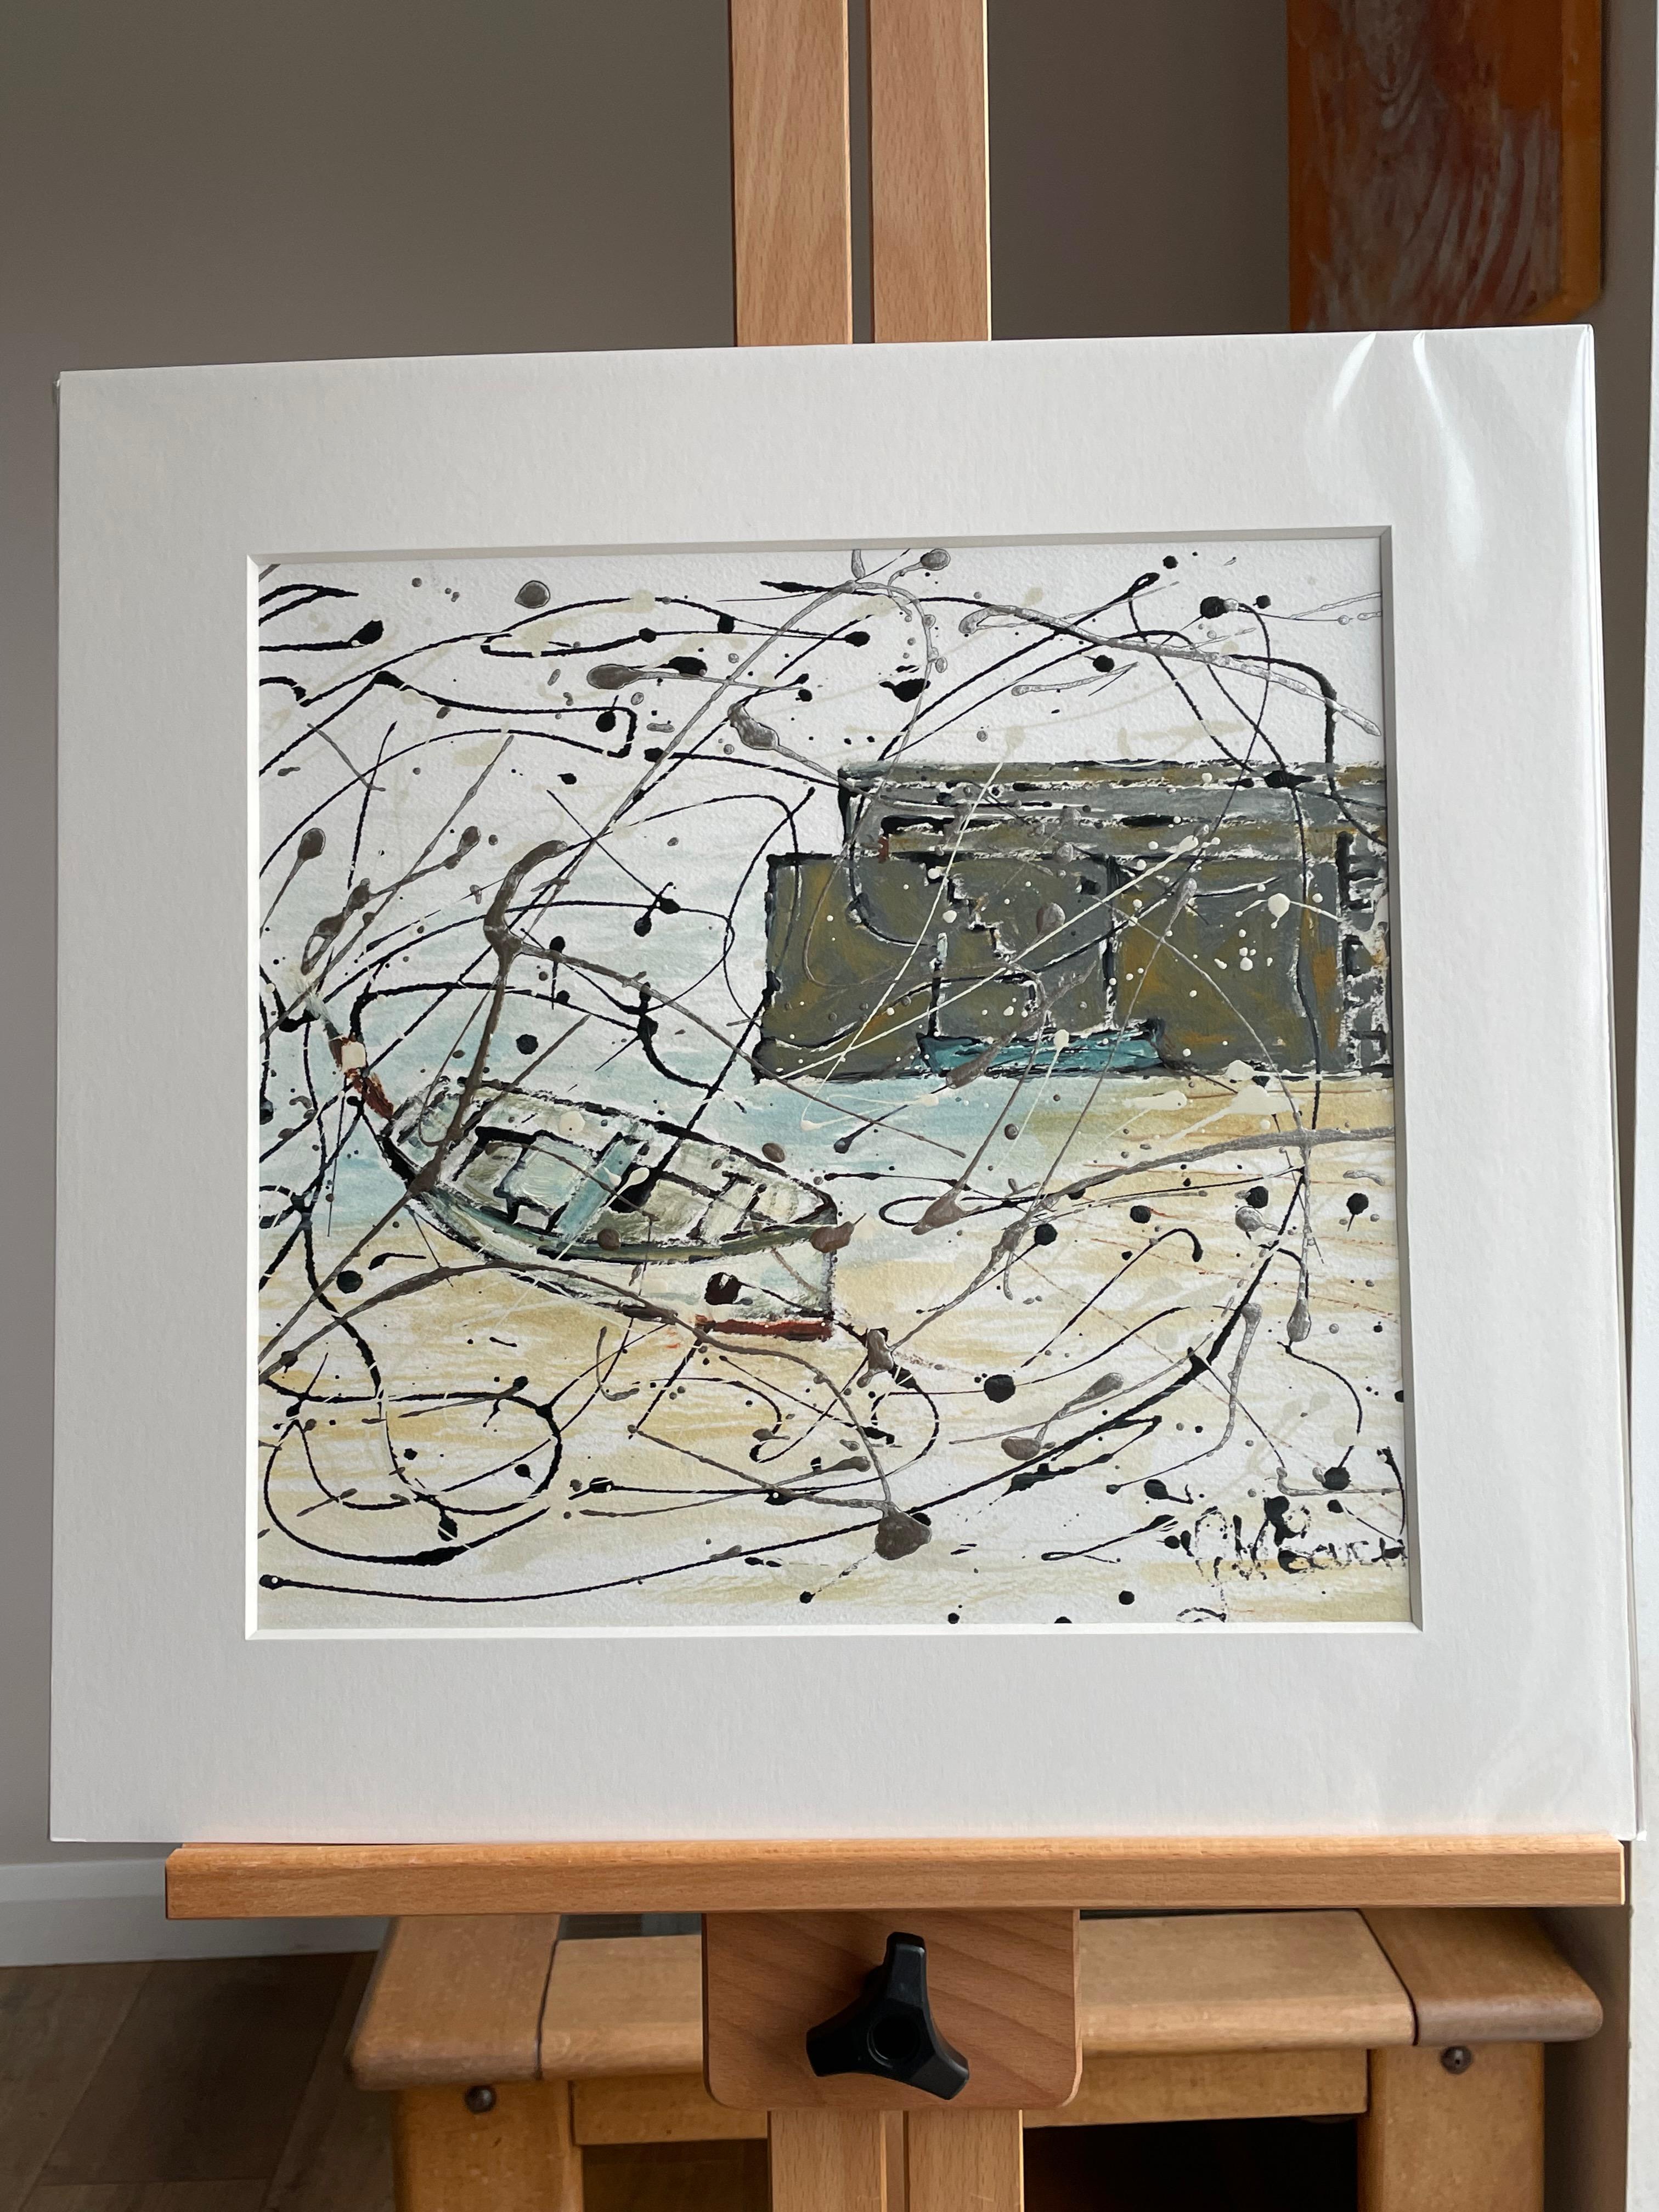 Splatter painting probably showing Mousehole harbour, Cornwall England. A small rowing boat lays stranded on the low tide just awaiting high tide. The splatter painting lifts this piece and gives it movement and free form contrasting with the